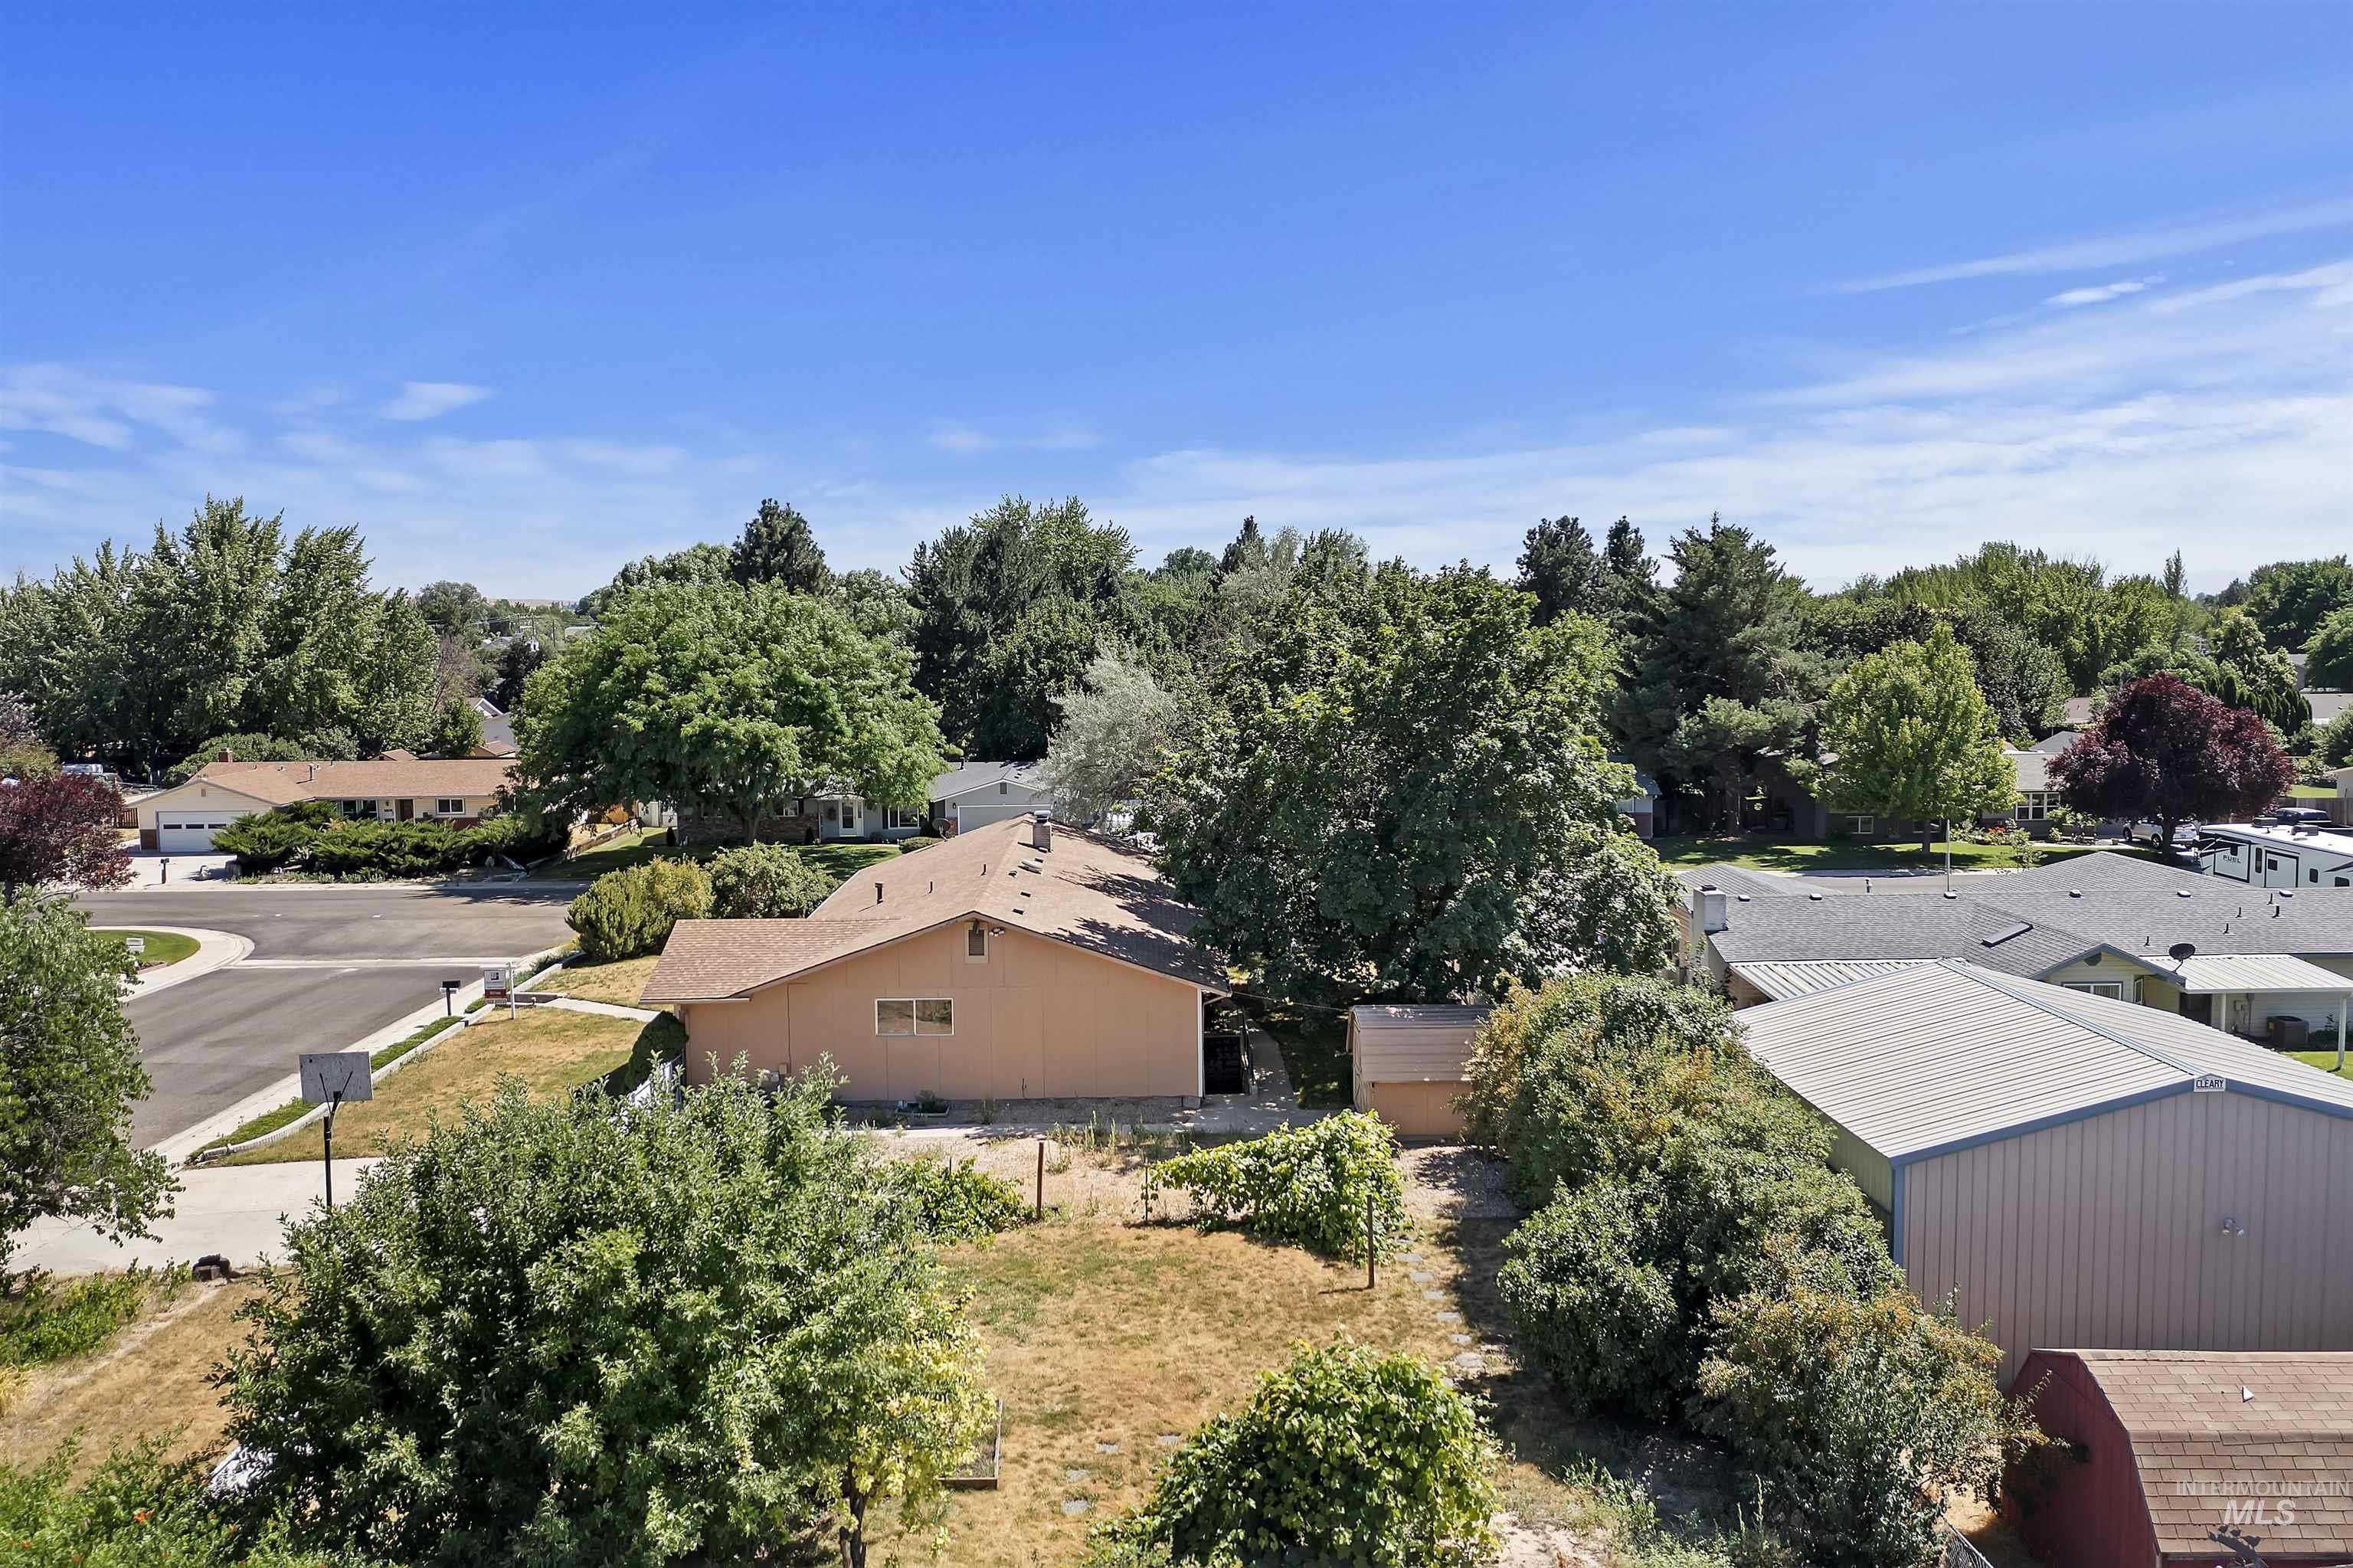 10674 W Onondaga Dr, Boise, Idaho 83709, 5 Bedrooms, 3 Bathrooms, Residential For Sale, Price $450,000,MLS 98843624